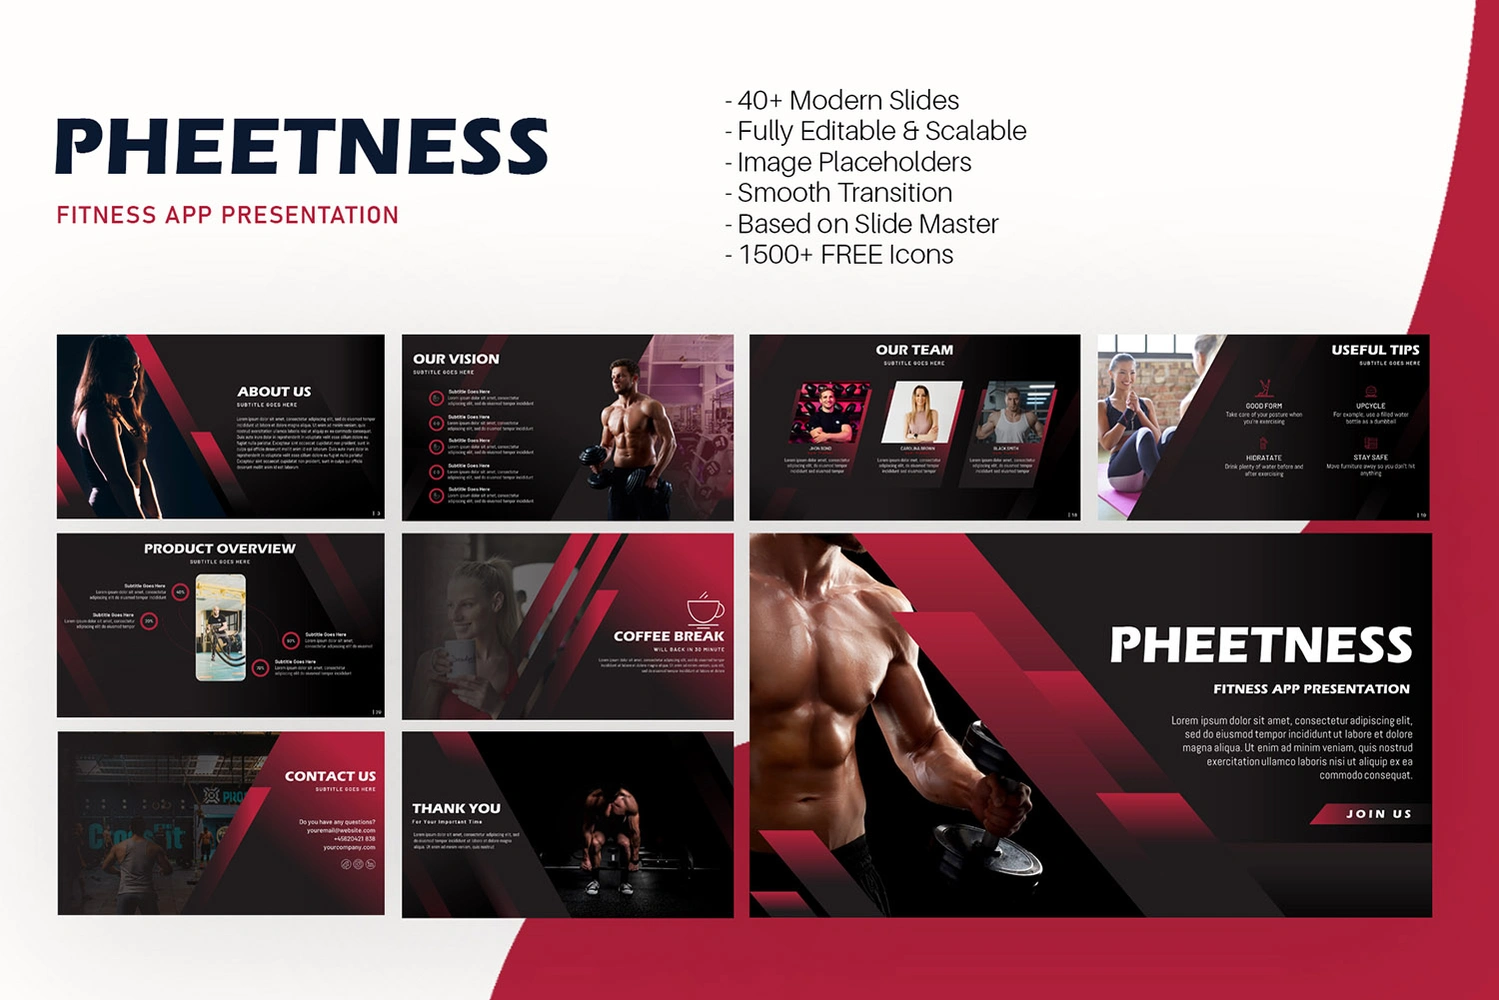 Pheetness fitness app presentation, 40+ modern slides, fully editable & scalable, image placeholders, smooth transition, based on slide master, 1500+ free icons